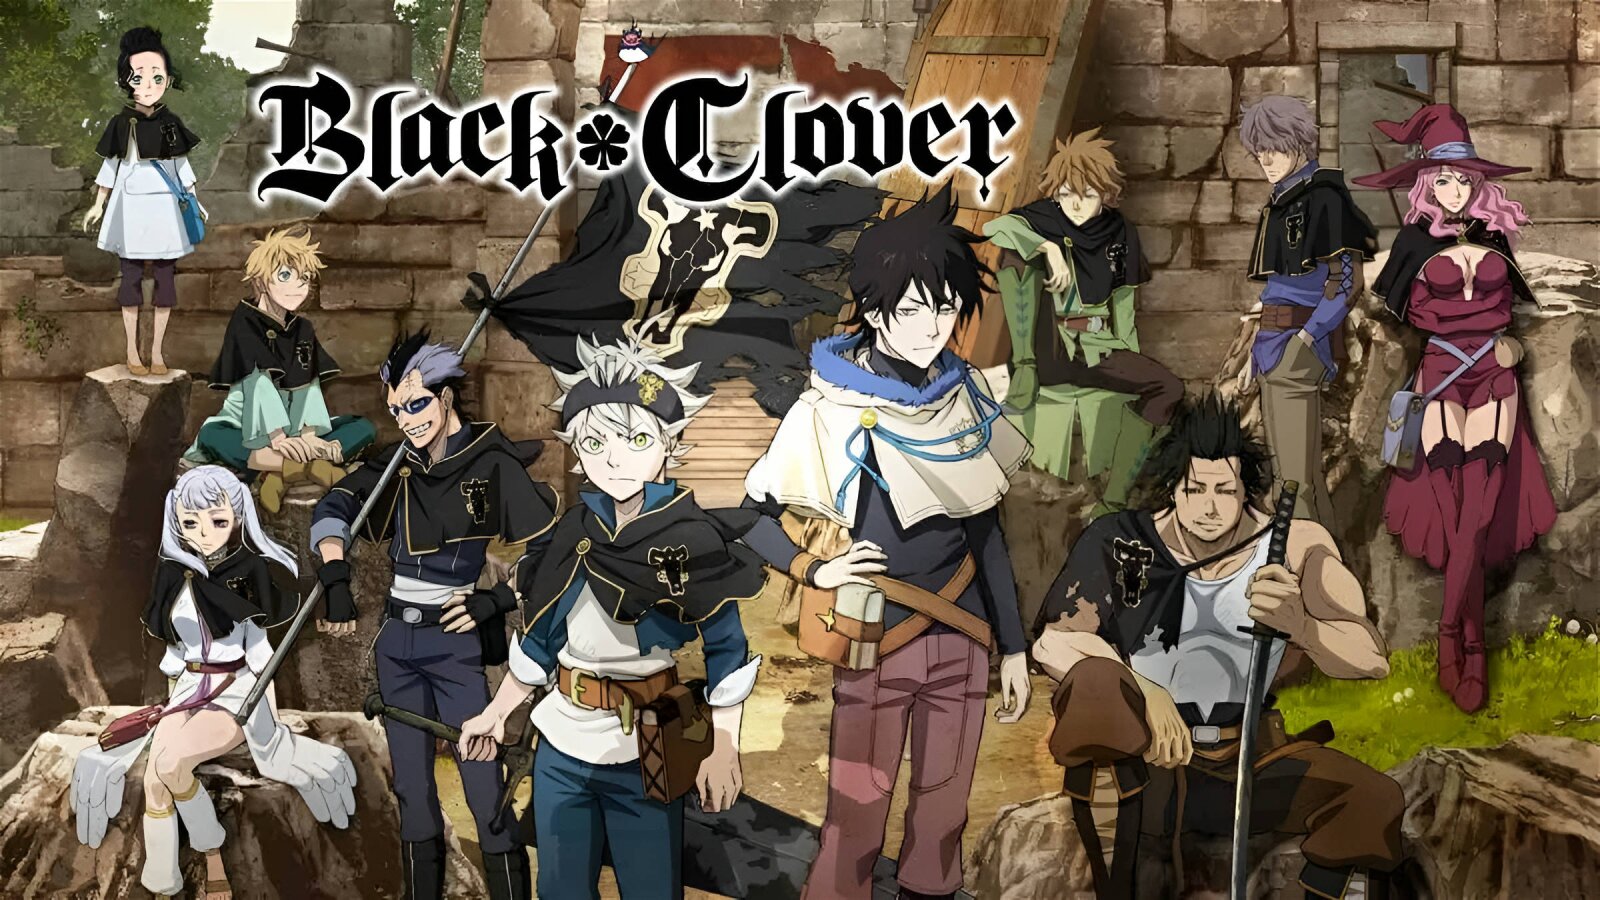 Pre-Registrations Open for Black Clover M: Rise of the Wizard King Game